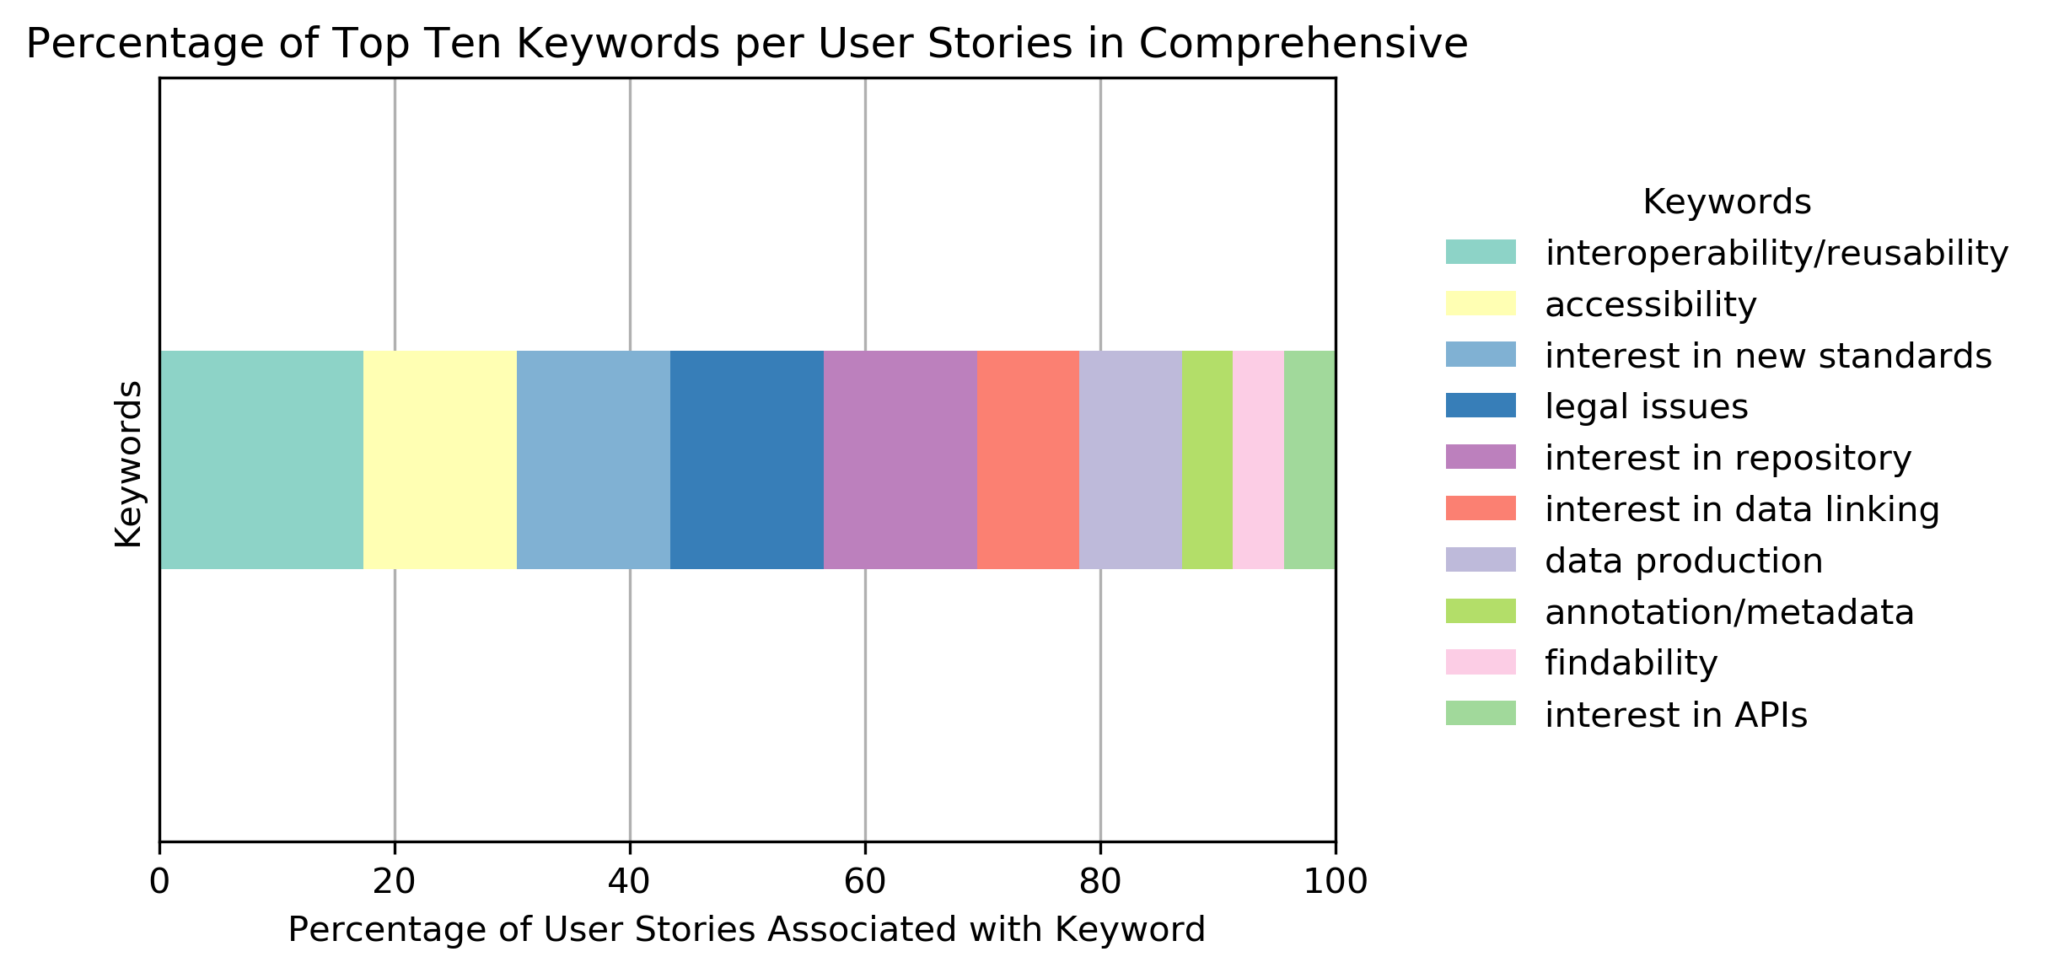 Percentage of cross-domain User Stories for the 10 most-used keywords